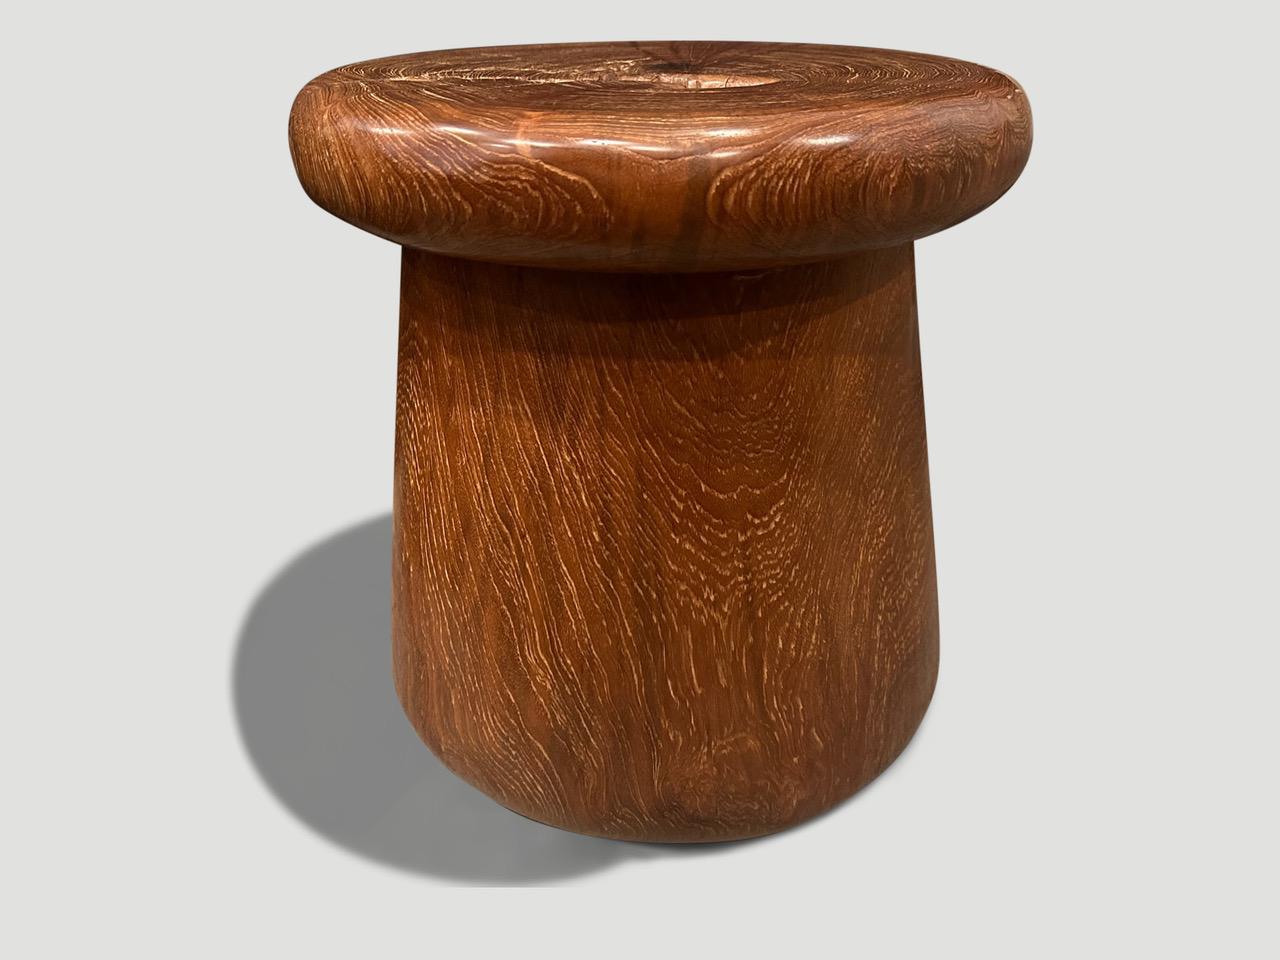 Andrianna Shamaris Century Old Teak Wood Side Table or Stool In Excellent Condition For Sale In New York, NY